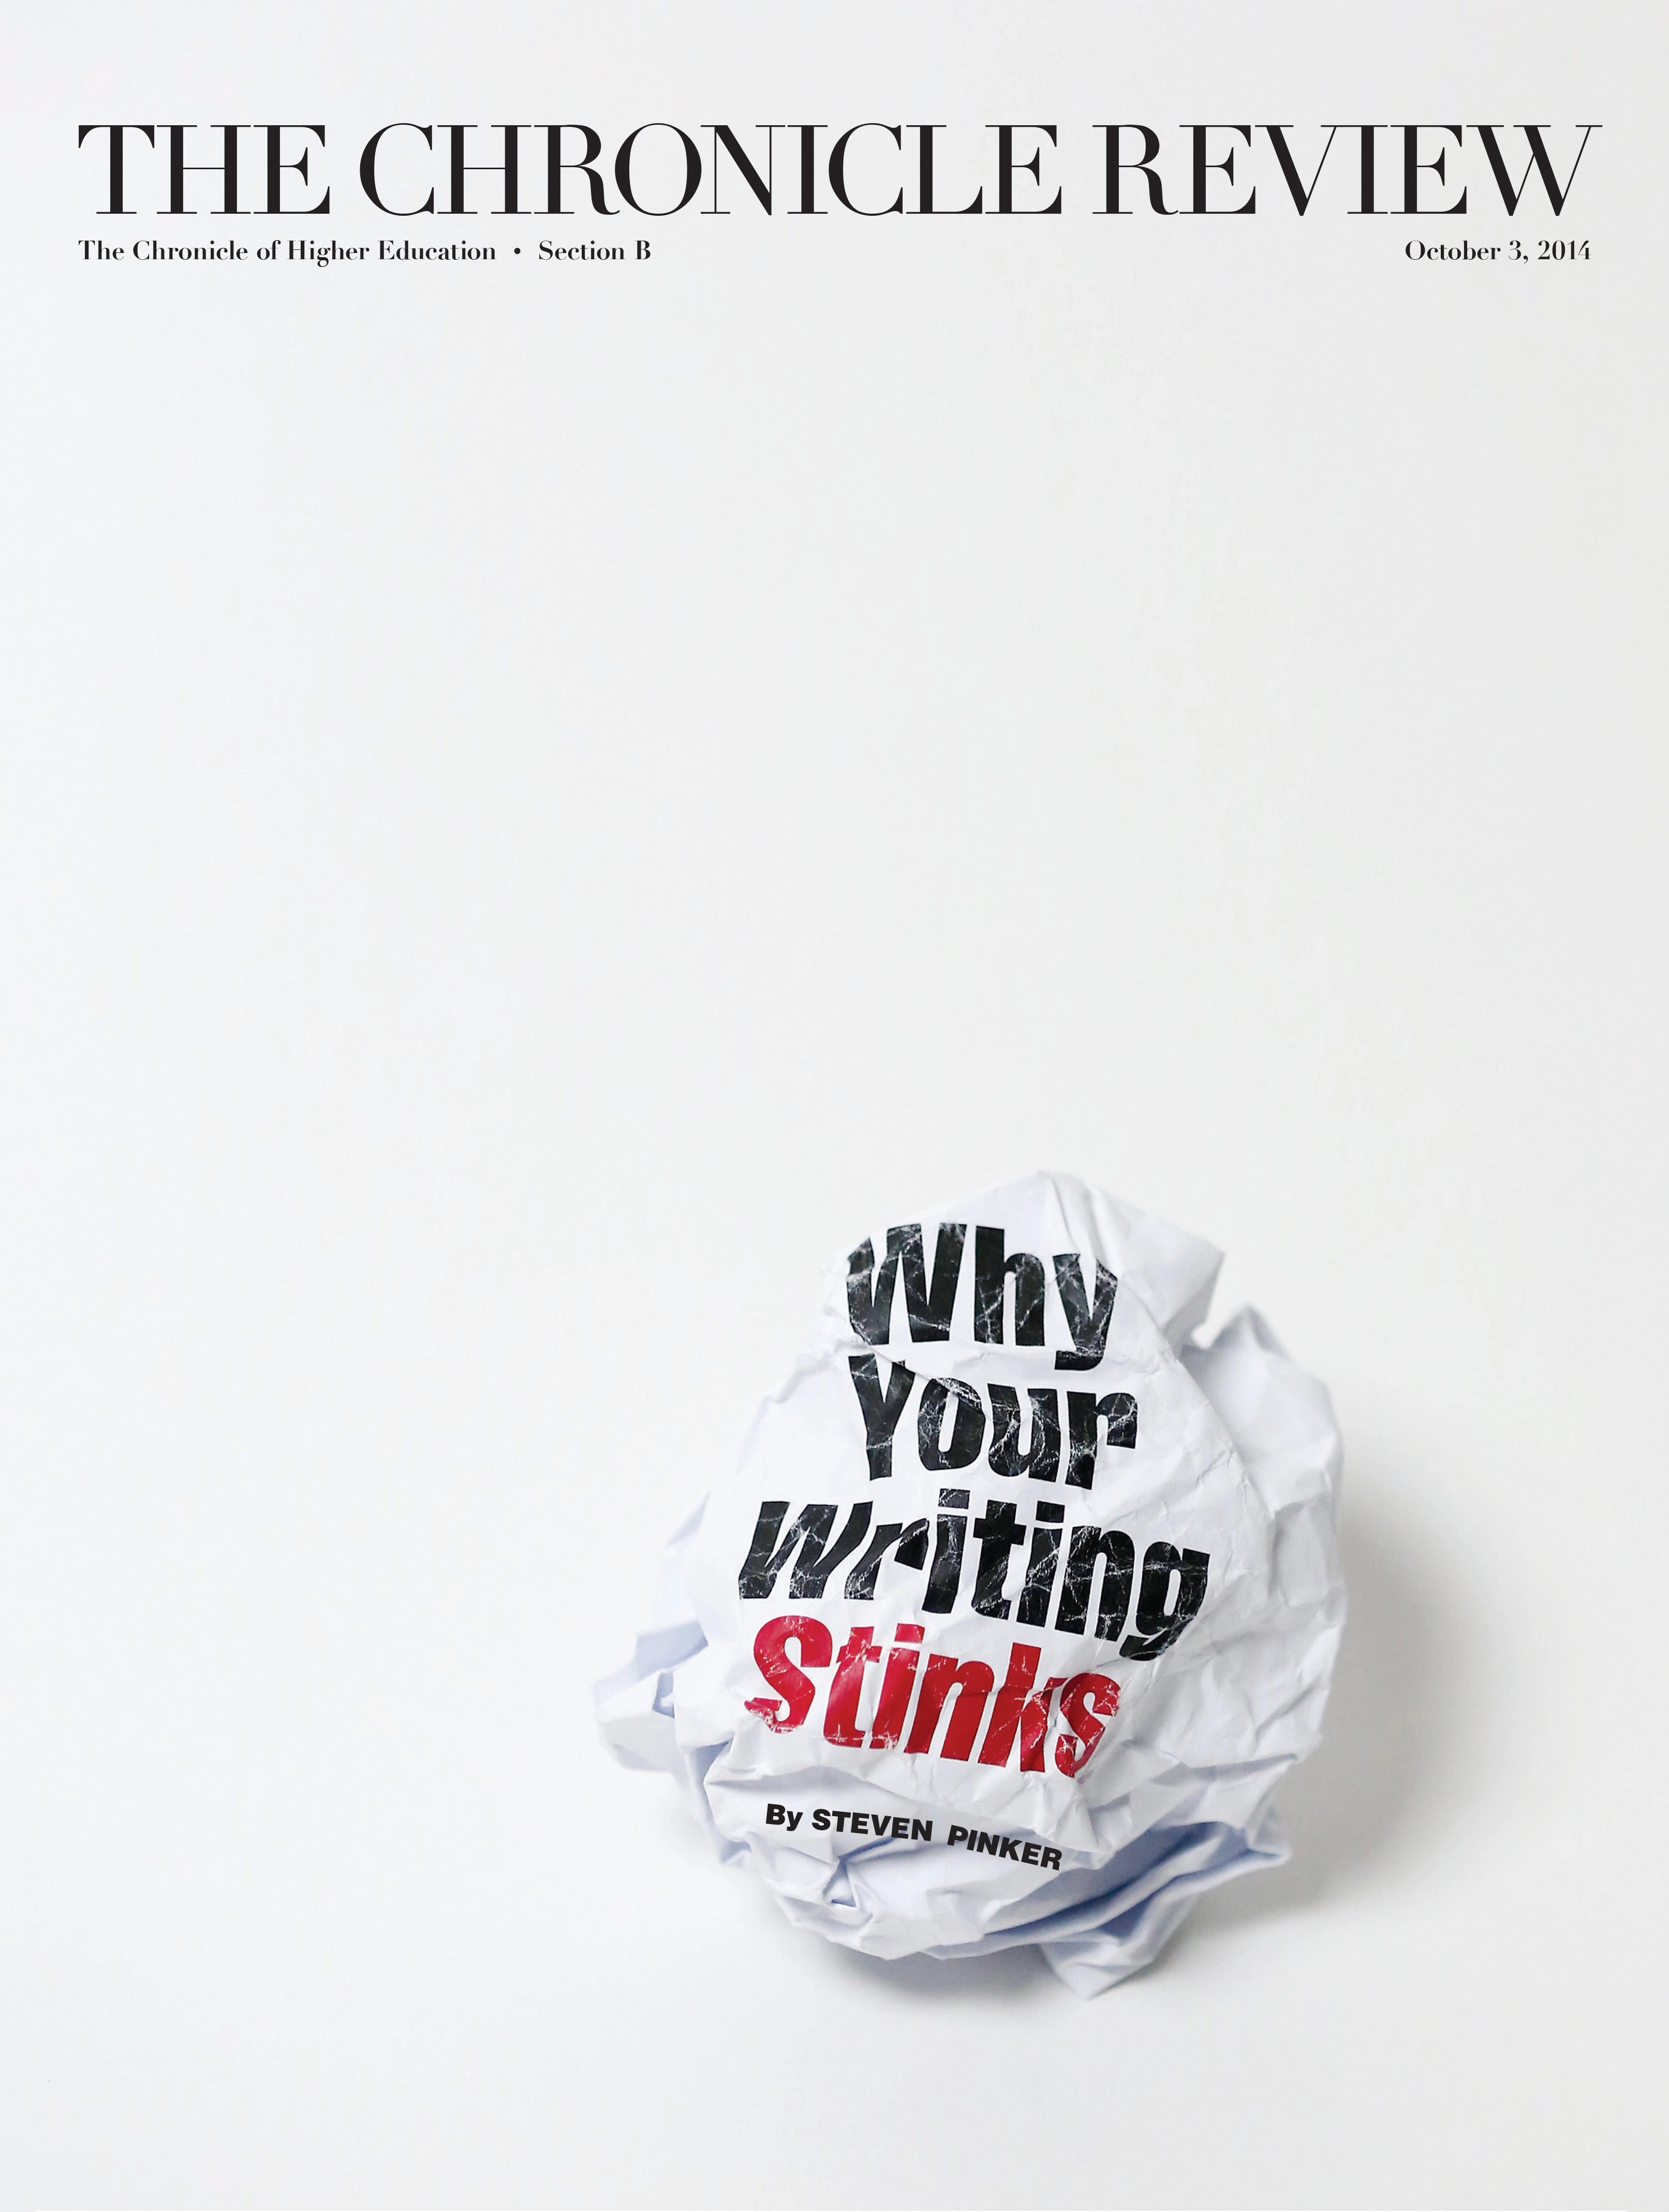 The Chronicle Review-October 3, 2014, "Why Your Writing Stinks"